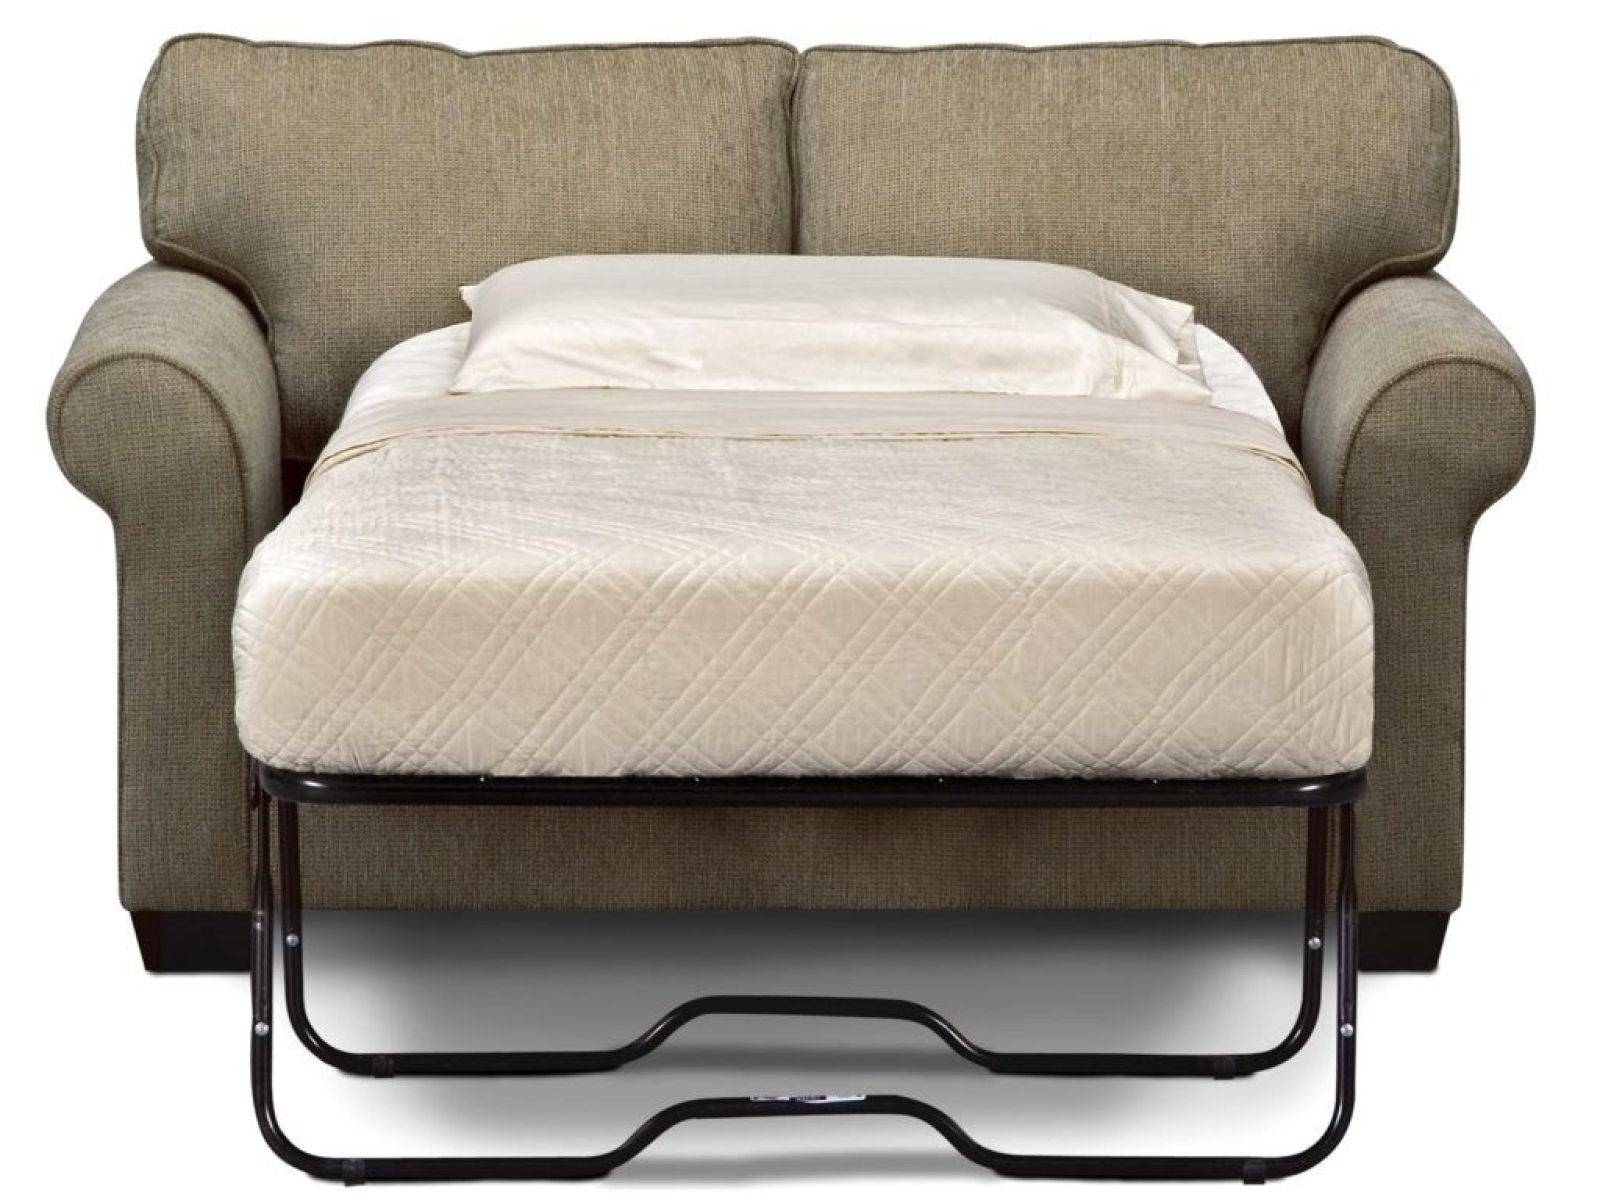 Principal 176+ imagen love seat pull out bed - In.thptnganamst.edu.vn